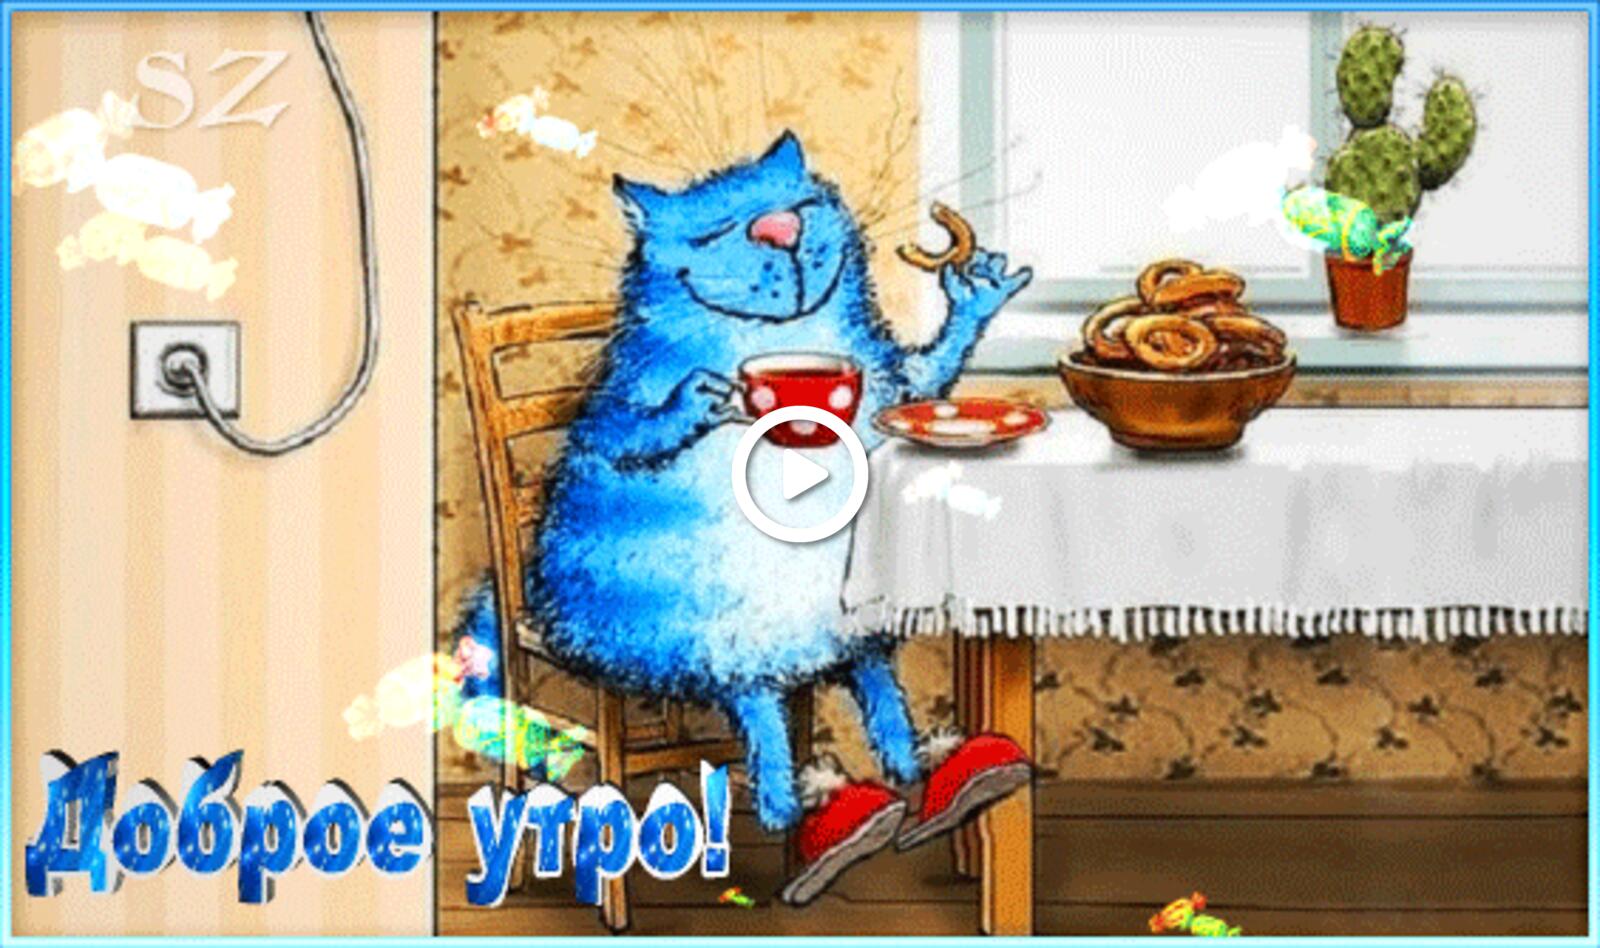 A postcard on the subject of good morning animation funny miscellaneous cat for free